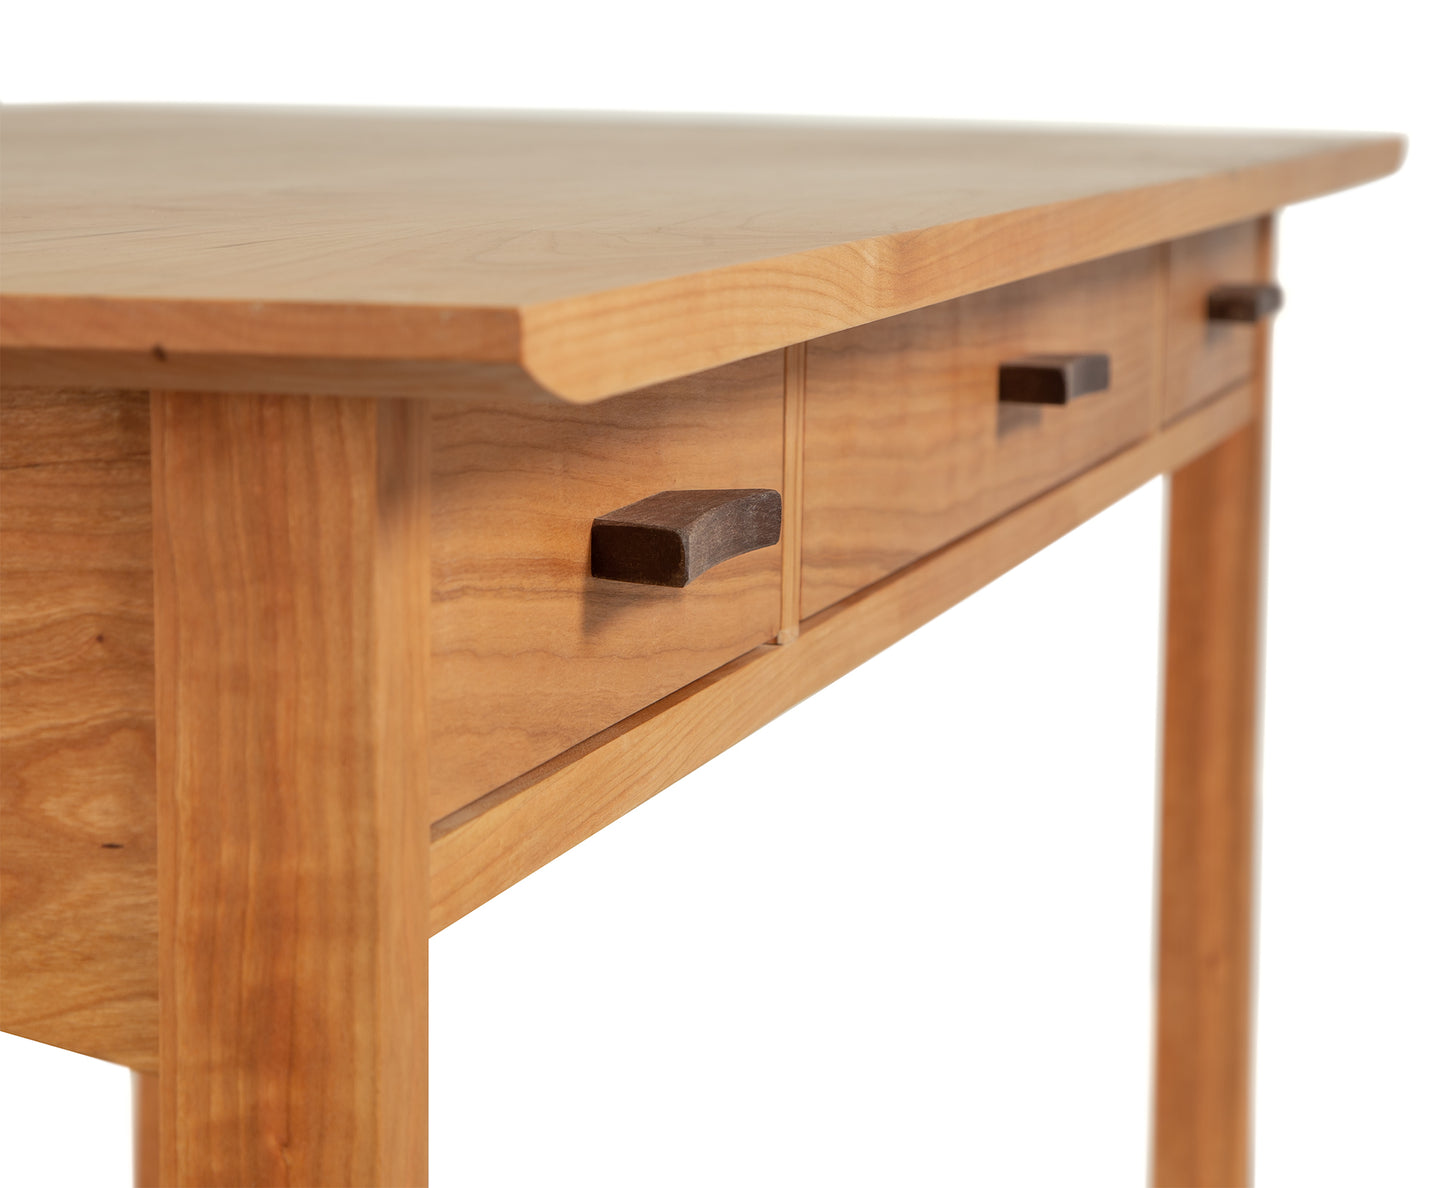 An Vermont Furniture Designs Contemporary Craftsman Library Desk with two drawers.